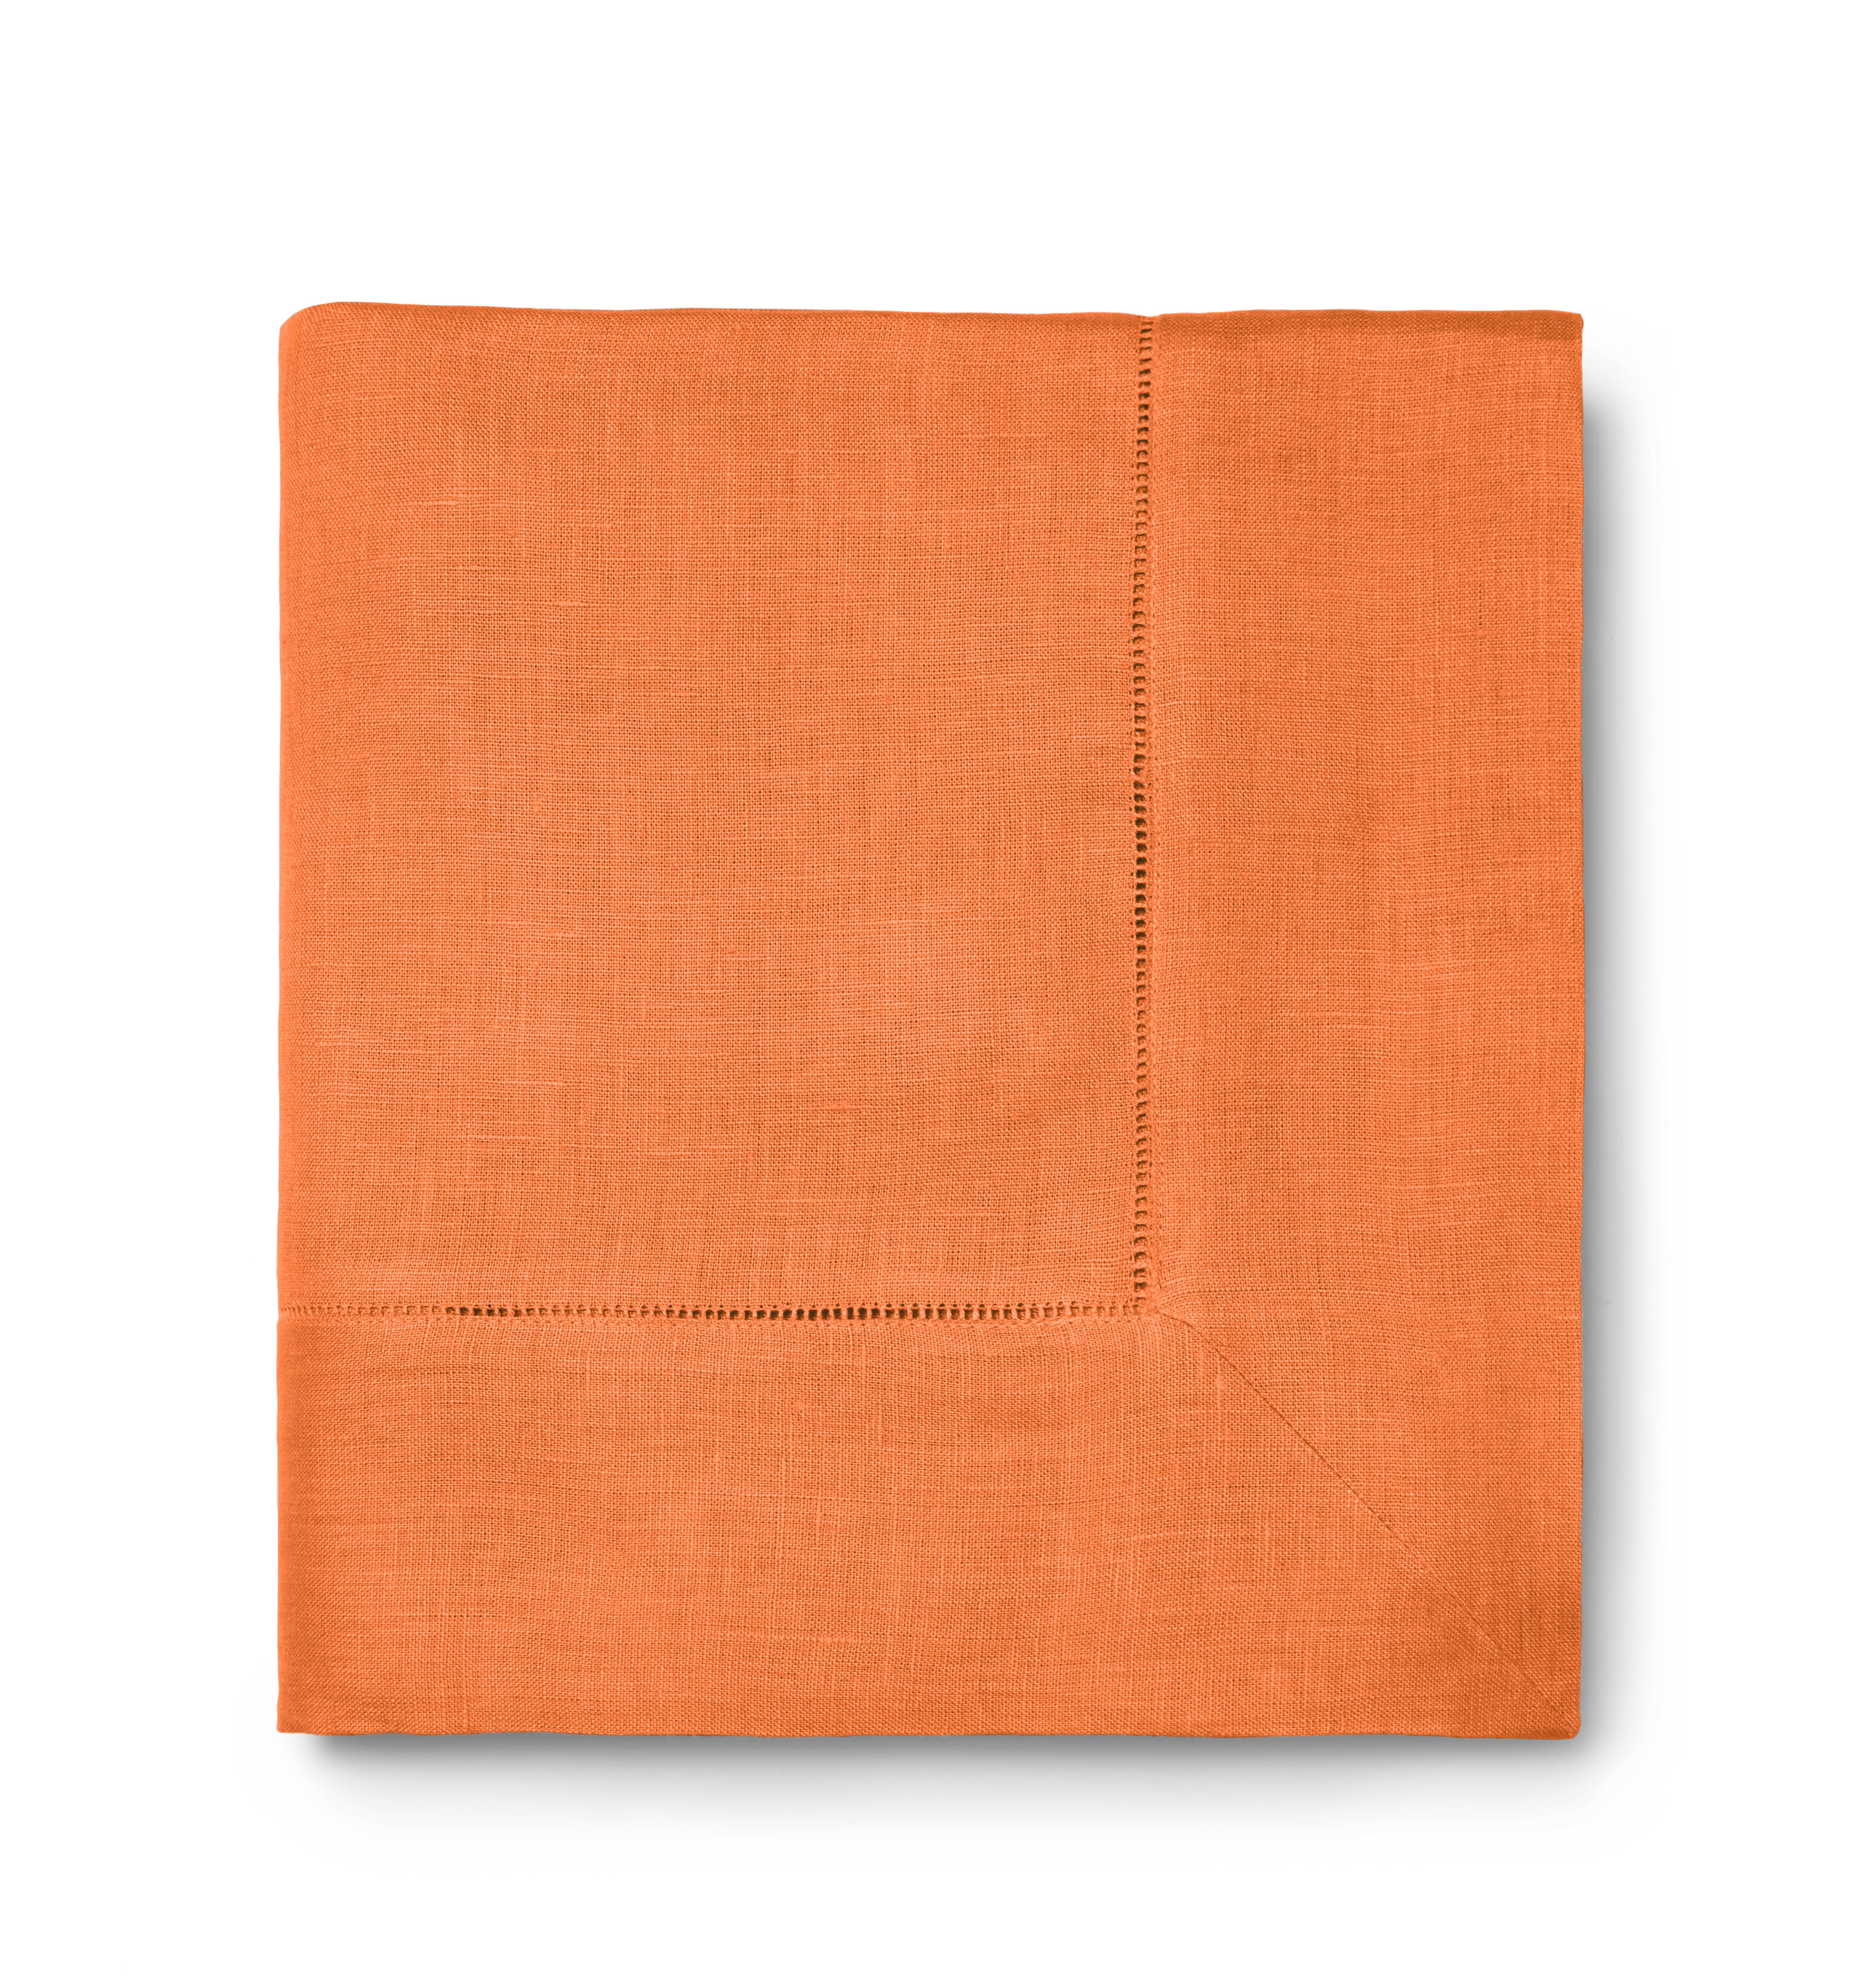 Home Treasures Riley Cocktail Napkins - Set of 6 (Available in 3 Colors)